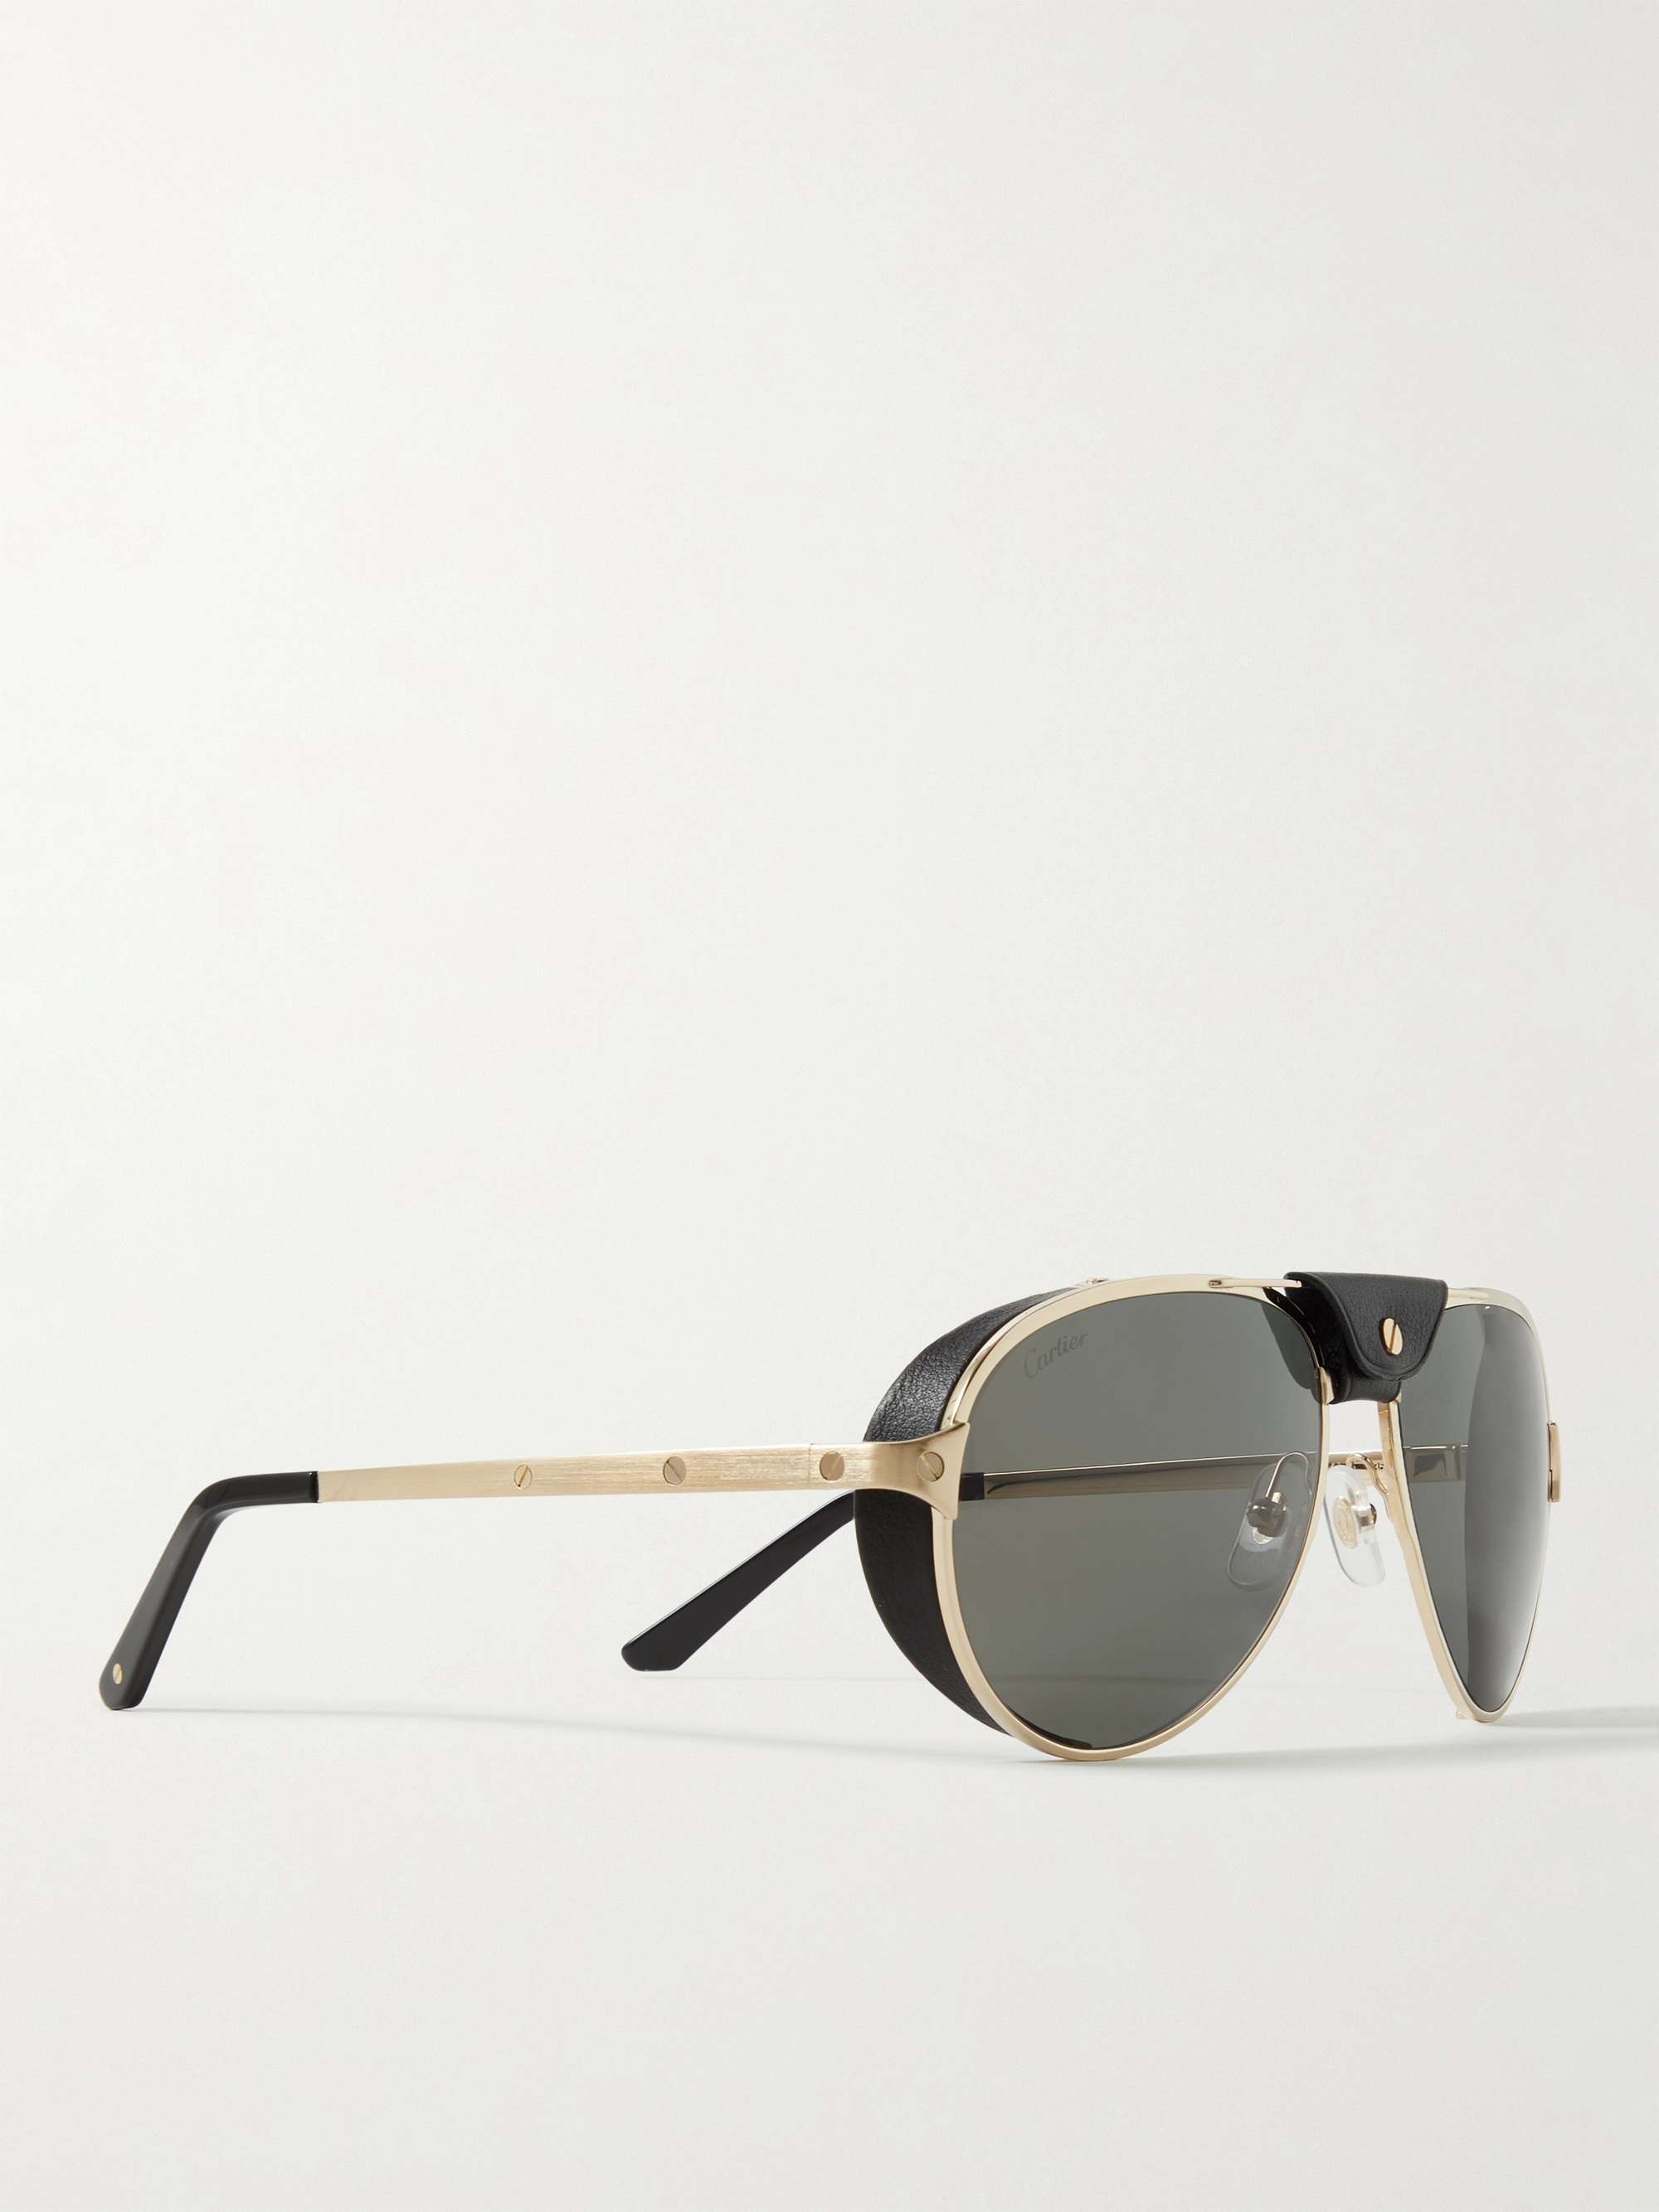 CARTIER EYEWEAR Aviator-Style Leather-Trimmed Gold-Tone Sunglasses